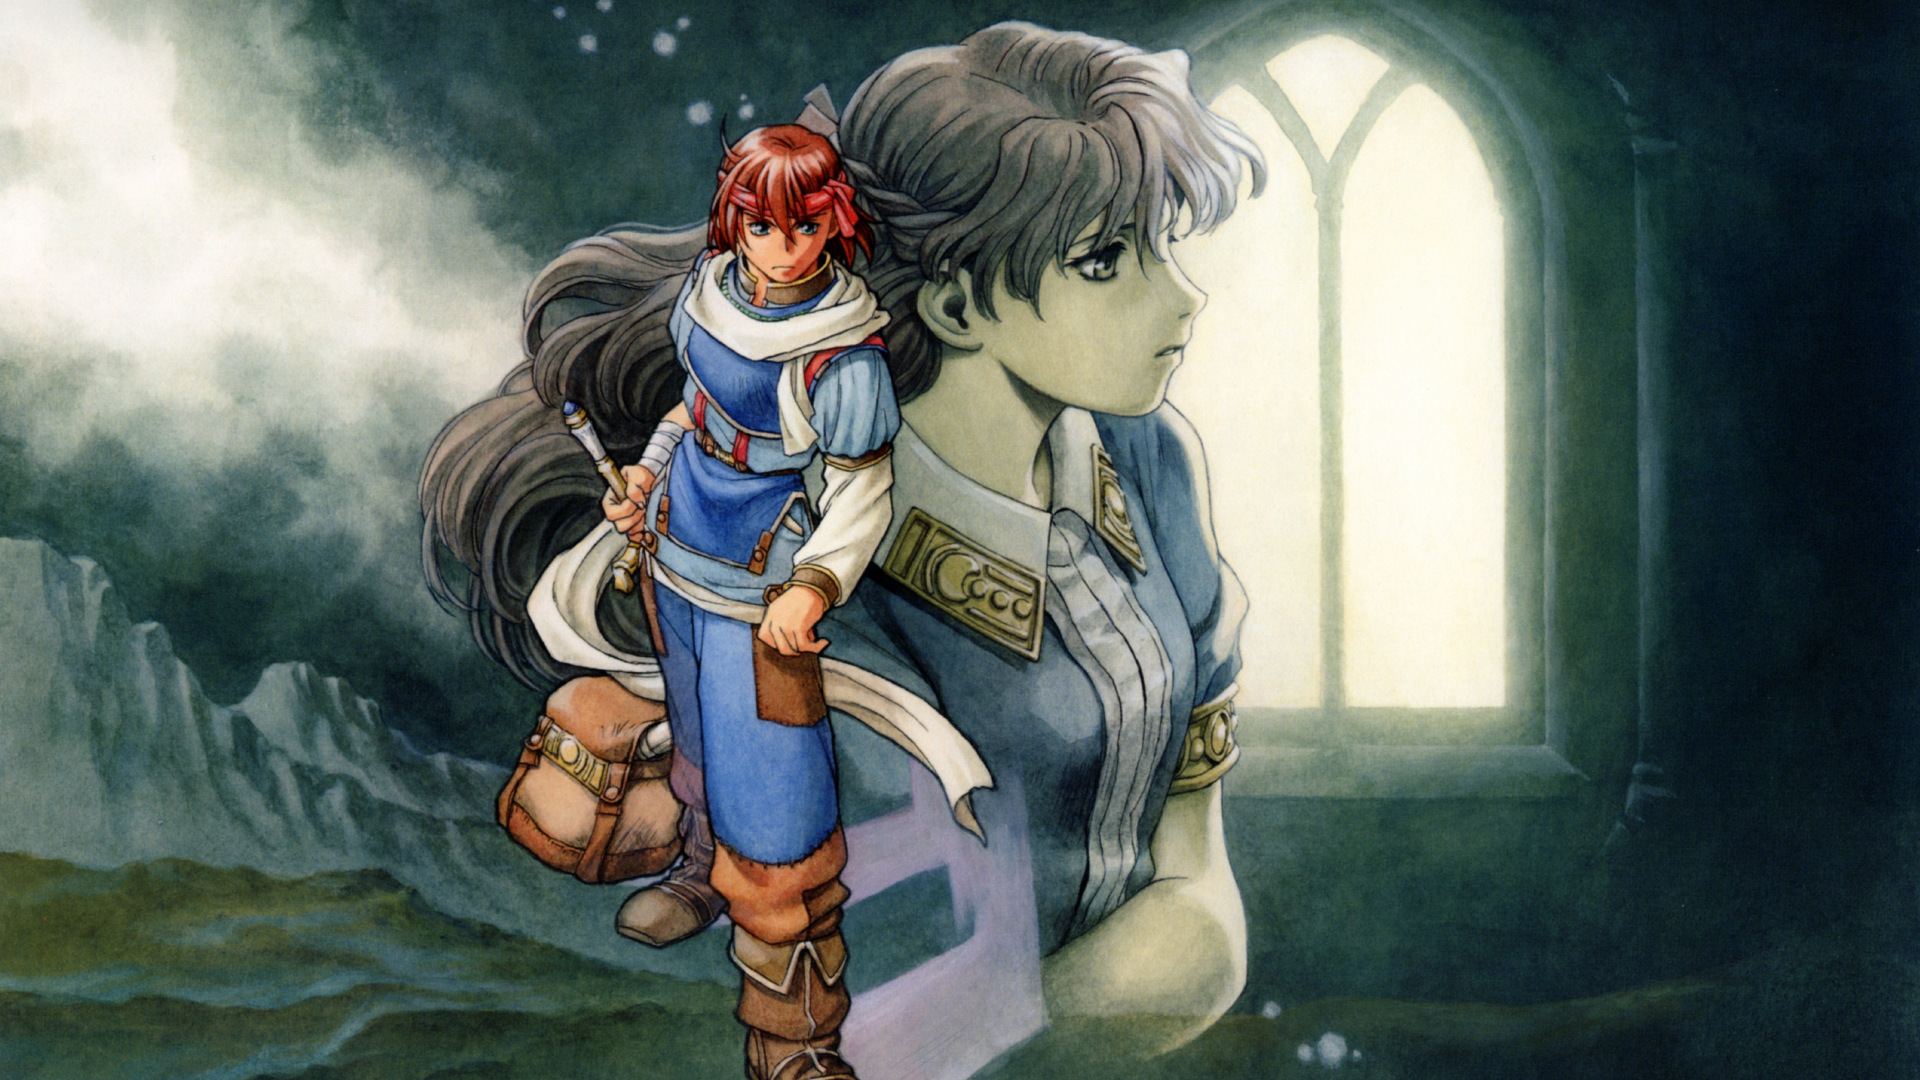 The Legend of Heroes: A Tear of Vermillion